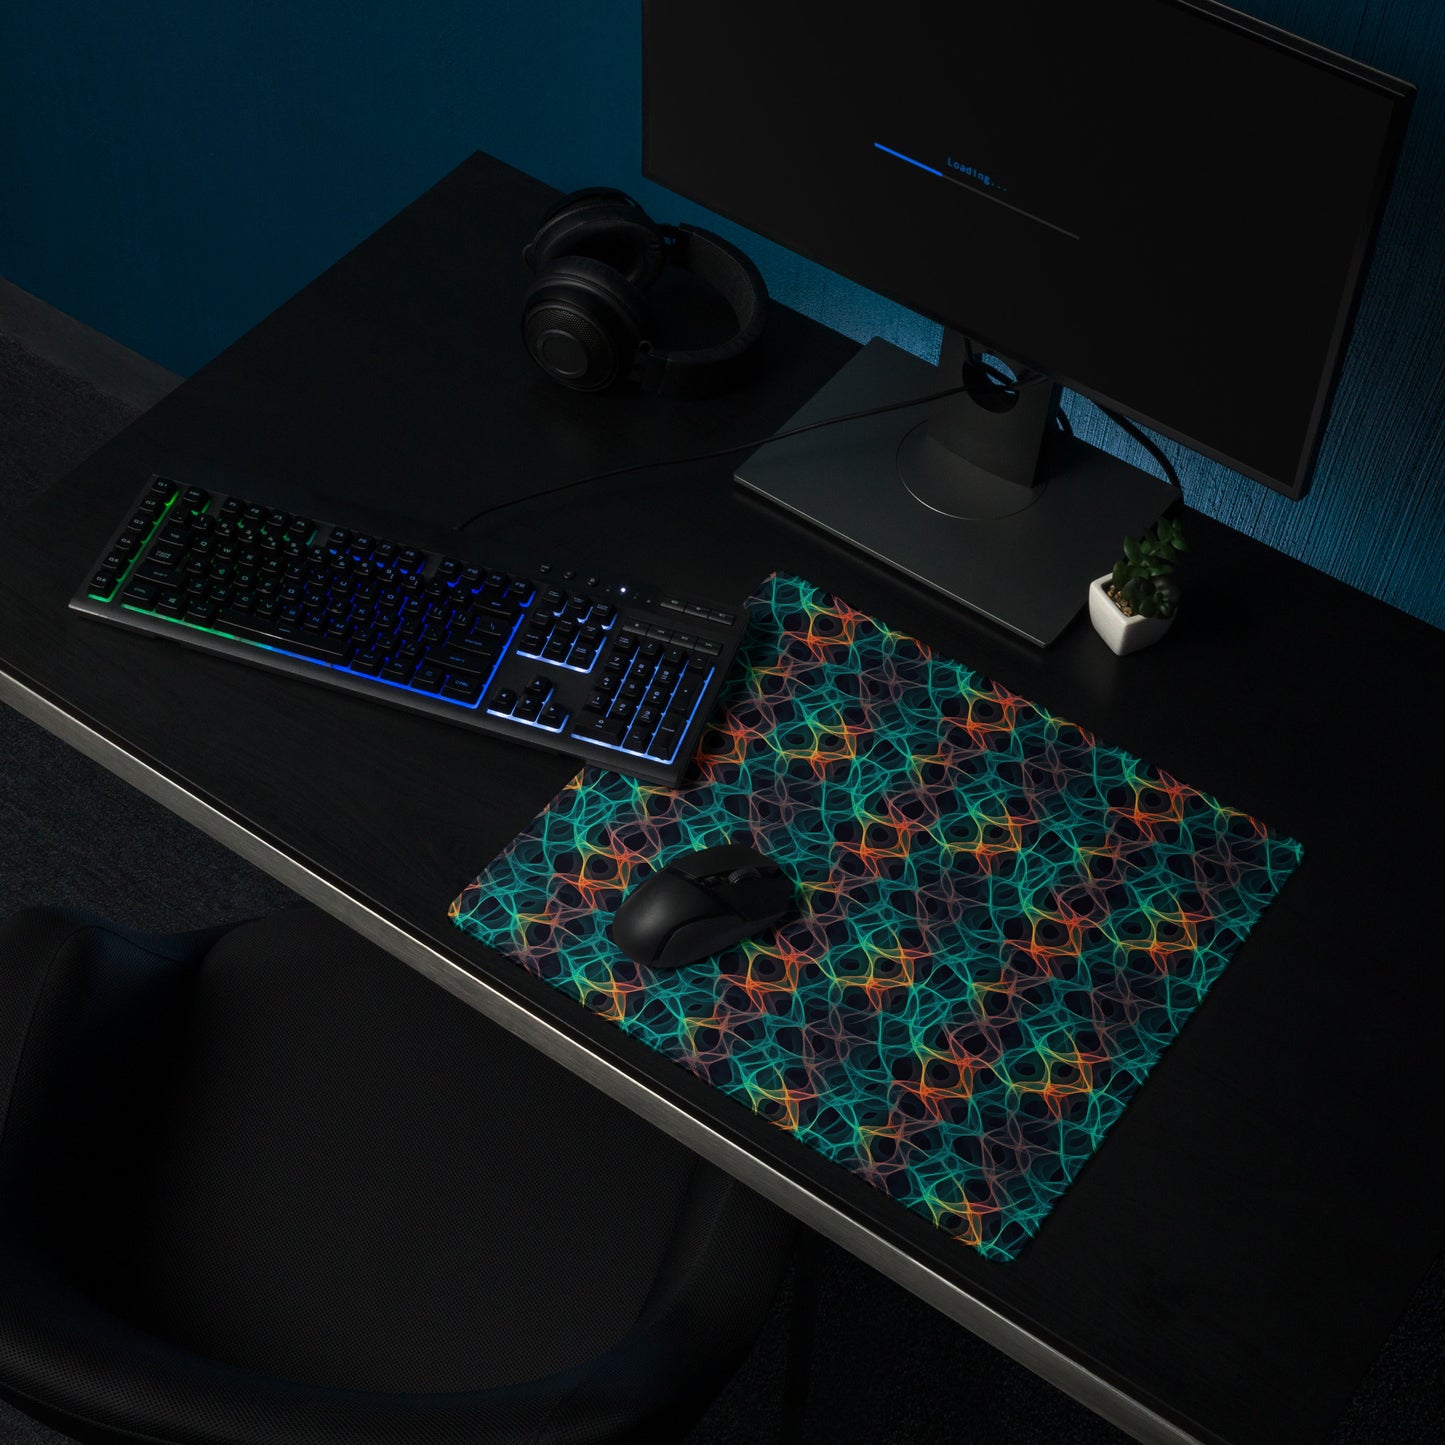 A 18" x 16" desk pad with an abstract pattern resembling a cell structure on it shown on a desk setup. Rainbow in color.